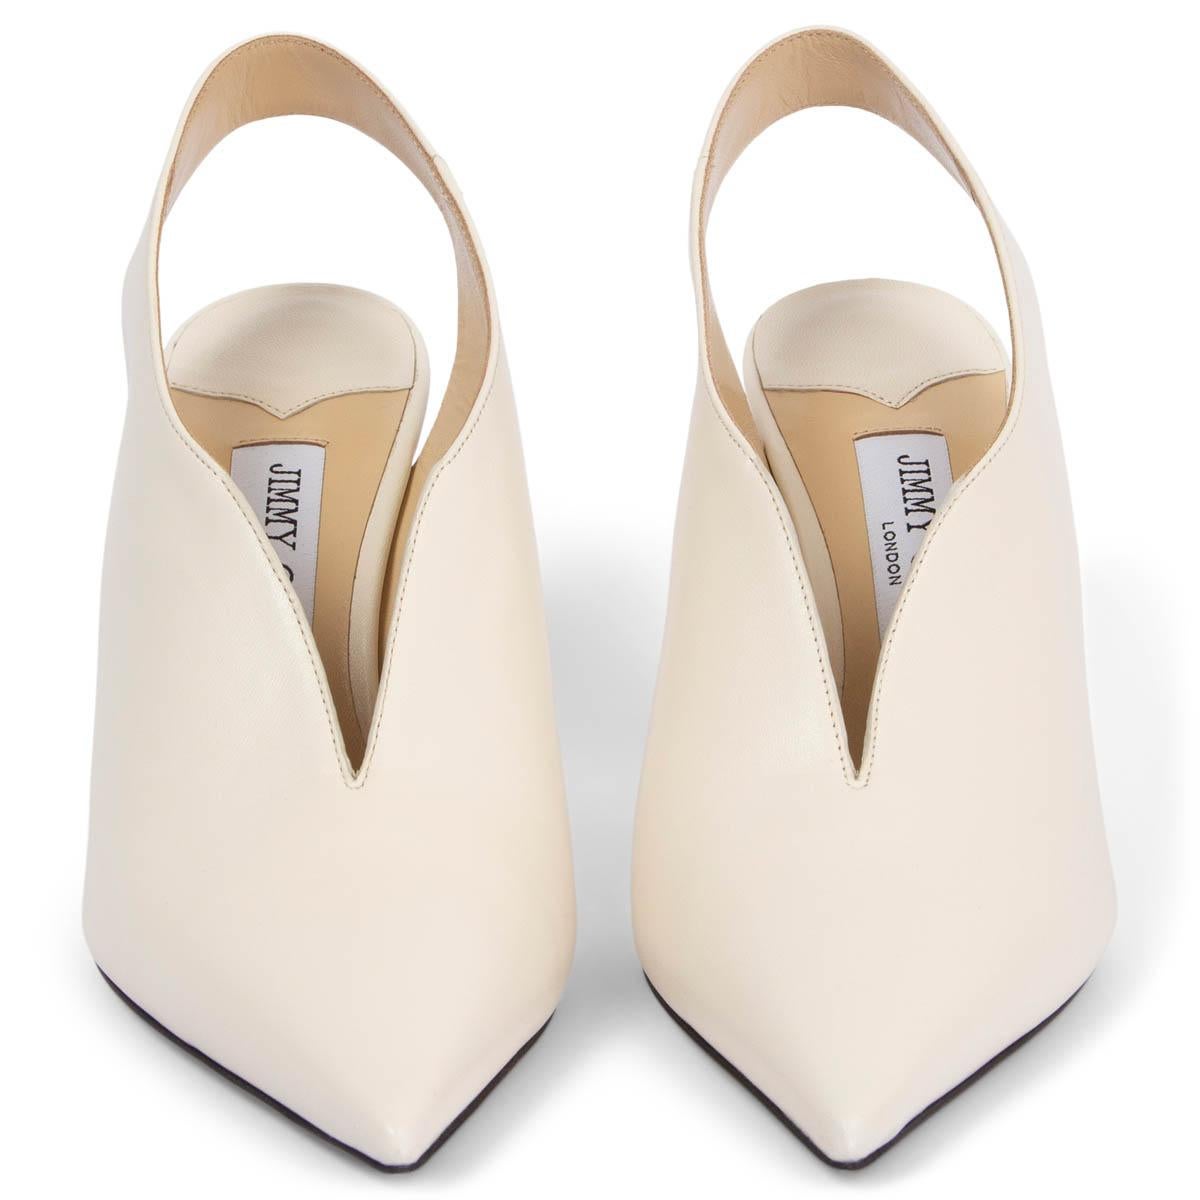 100% authentic Jimmy Choo Saise 85 pointed toe slingbacks in ivory smooth calfskin. Brand new. Come with dust bag. 

Measurements
Imprinted Size	39
Shoe Size	39
Inside Sole	25.5cm (9.9in)
Width	7.5cm (2.9in)
Heel	8.5cm (3.3in)

All our listings